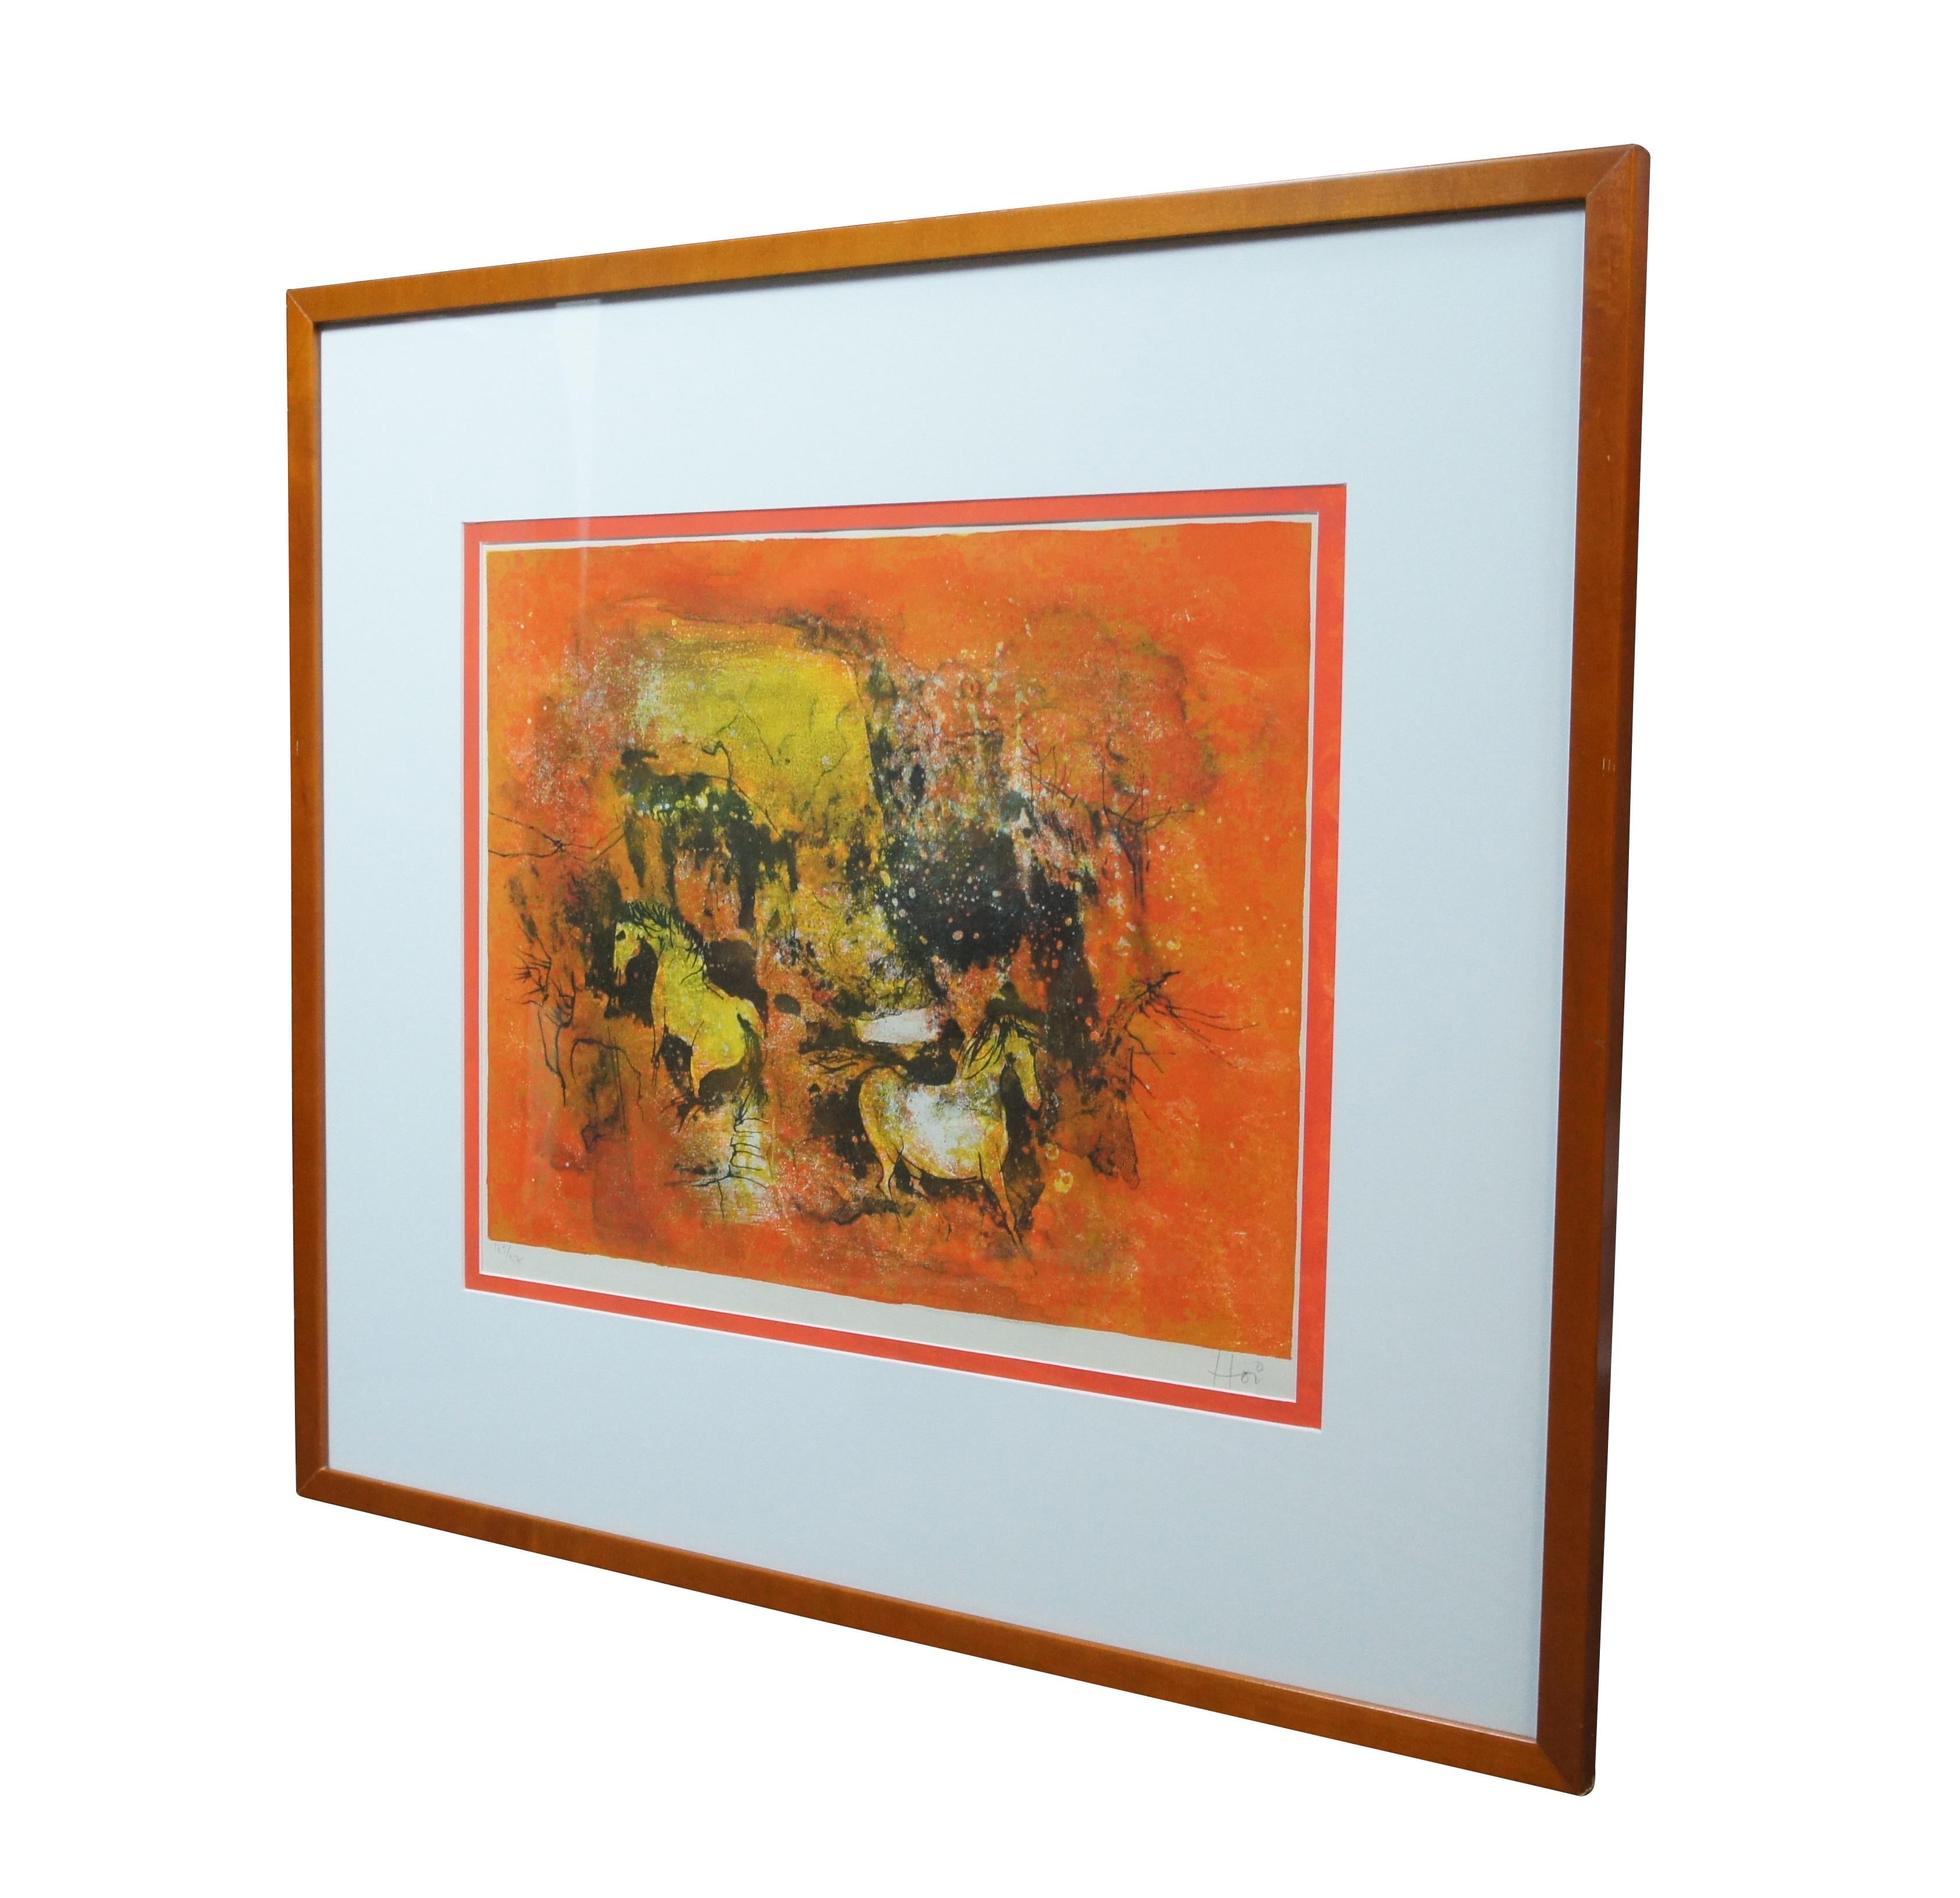 Mid century lithograph print by Hoi Ledabang. Shows an abstract pair of horses in an orange and yellow landscape. Pencil signed Hoi (lower right) and numbered 165/375 (lower left). Certificate of Authentication attached to back of frame - Societie